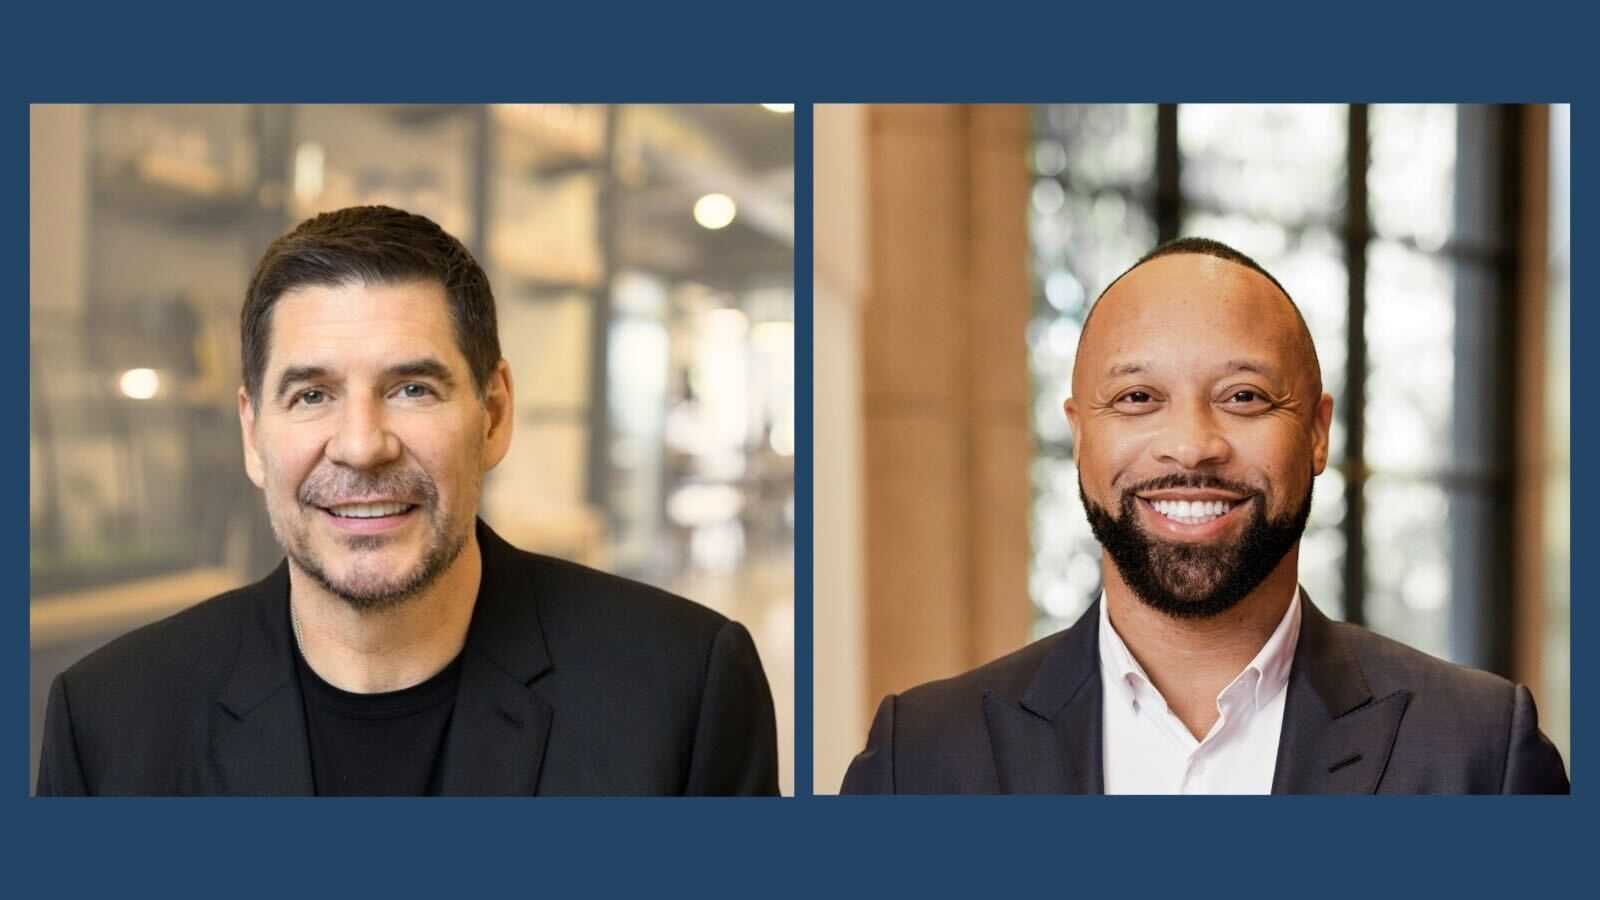 Marcelo Claure to Co-Lead and Co-Own Open Opportunity Fund in Partnership with Paul Judge